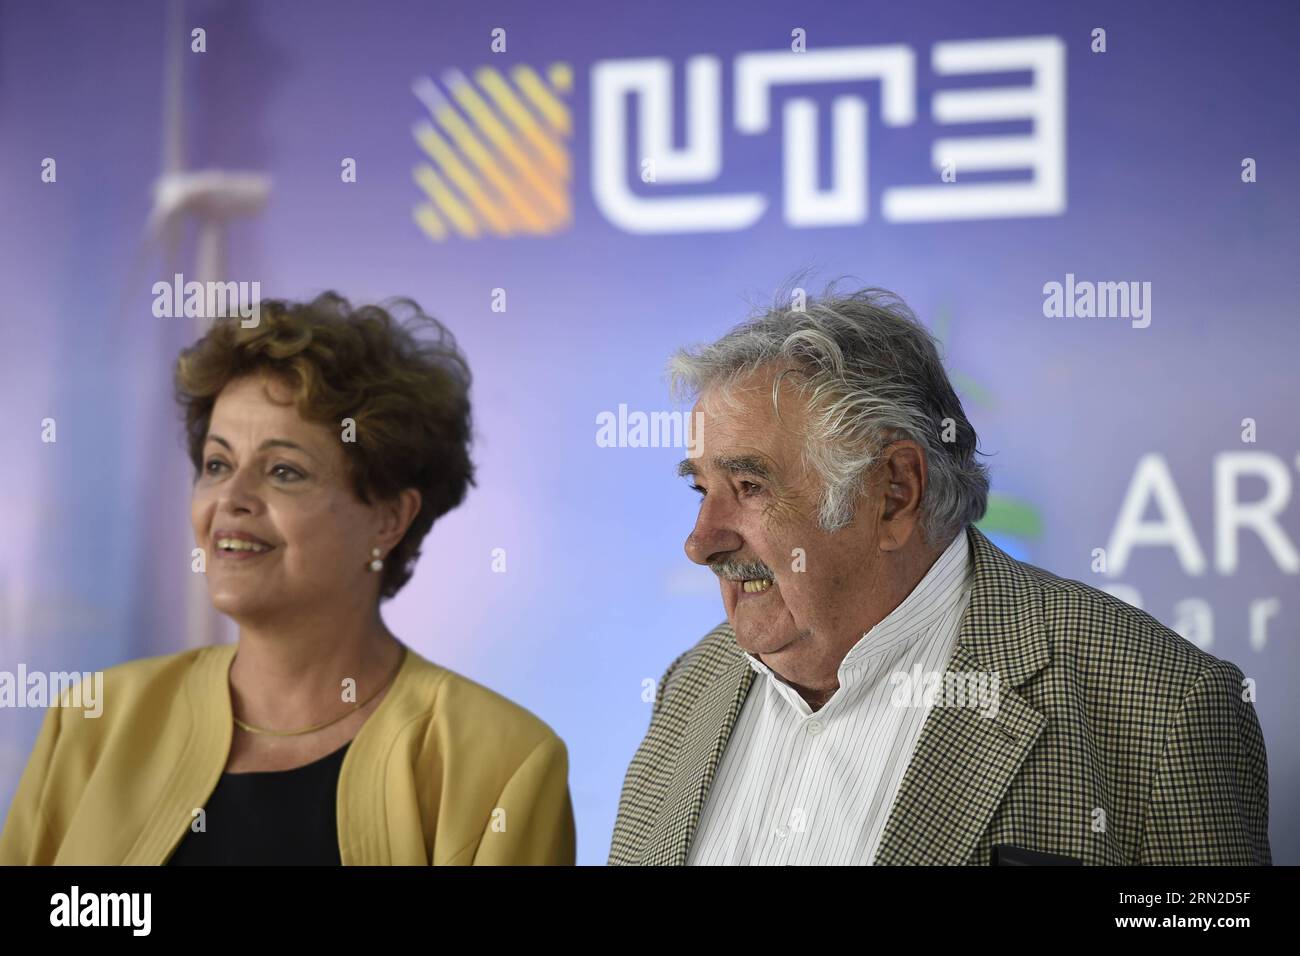 Uruguay s President Jose Mujica (R) and his Brazilian counterpart Dilma Rousseff attend the opening ceremony of the Wind Park, in Colonia department, 165 km from Montevideo, capital of Uruguay, on Feb. 28, 2015. The Wind Park is a joint venture between the National Administrations of Power Plants and Electrical Transmissions of Uruguay and the Brazilian Electrobras, with an investment of 100 million U.S. dollars to supply the electrical grids of both countries. Nicolas Celaya) URUGUAY-COLONIA-BRAZIL-POLITICS-WIND PARK e NICOLASxCELAYA PUBLICATIONxNOTxINxCHN   Uruguay S President Jose Mujica r Stock Photo